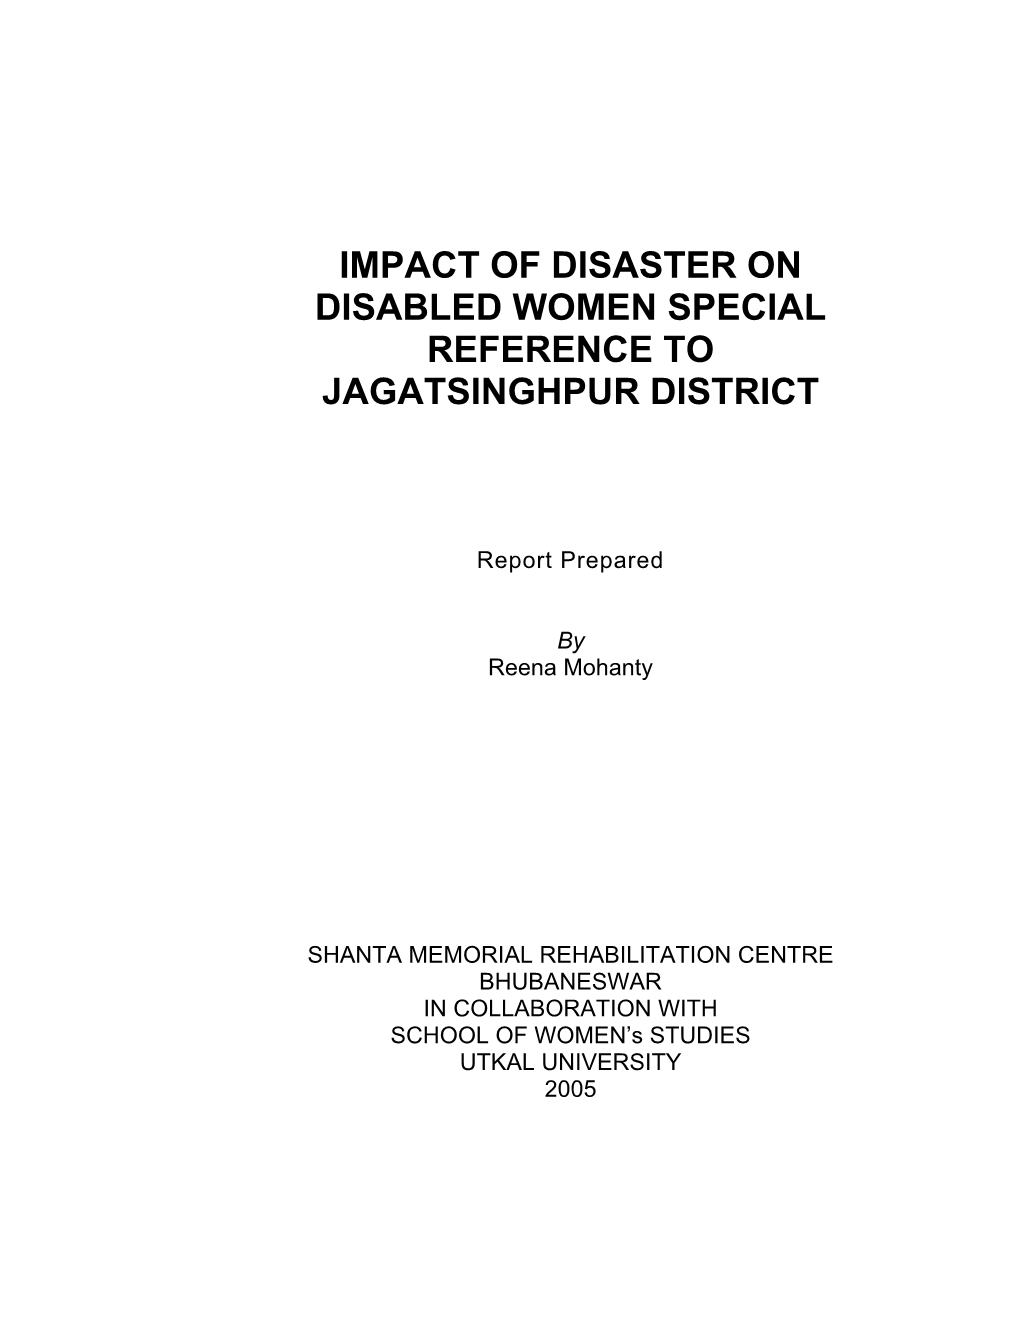 Impact of Disaster on Disabled Women Special Reference to Jagatsinghpur District